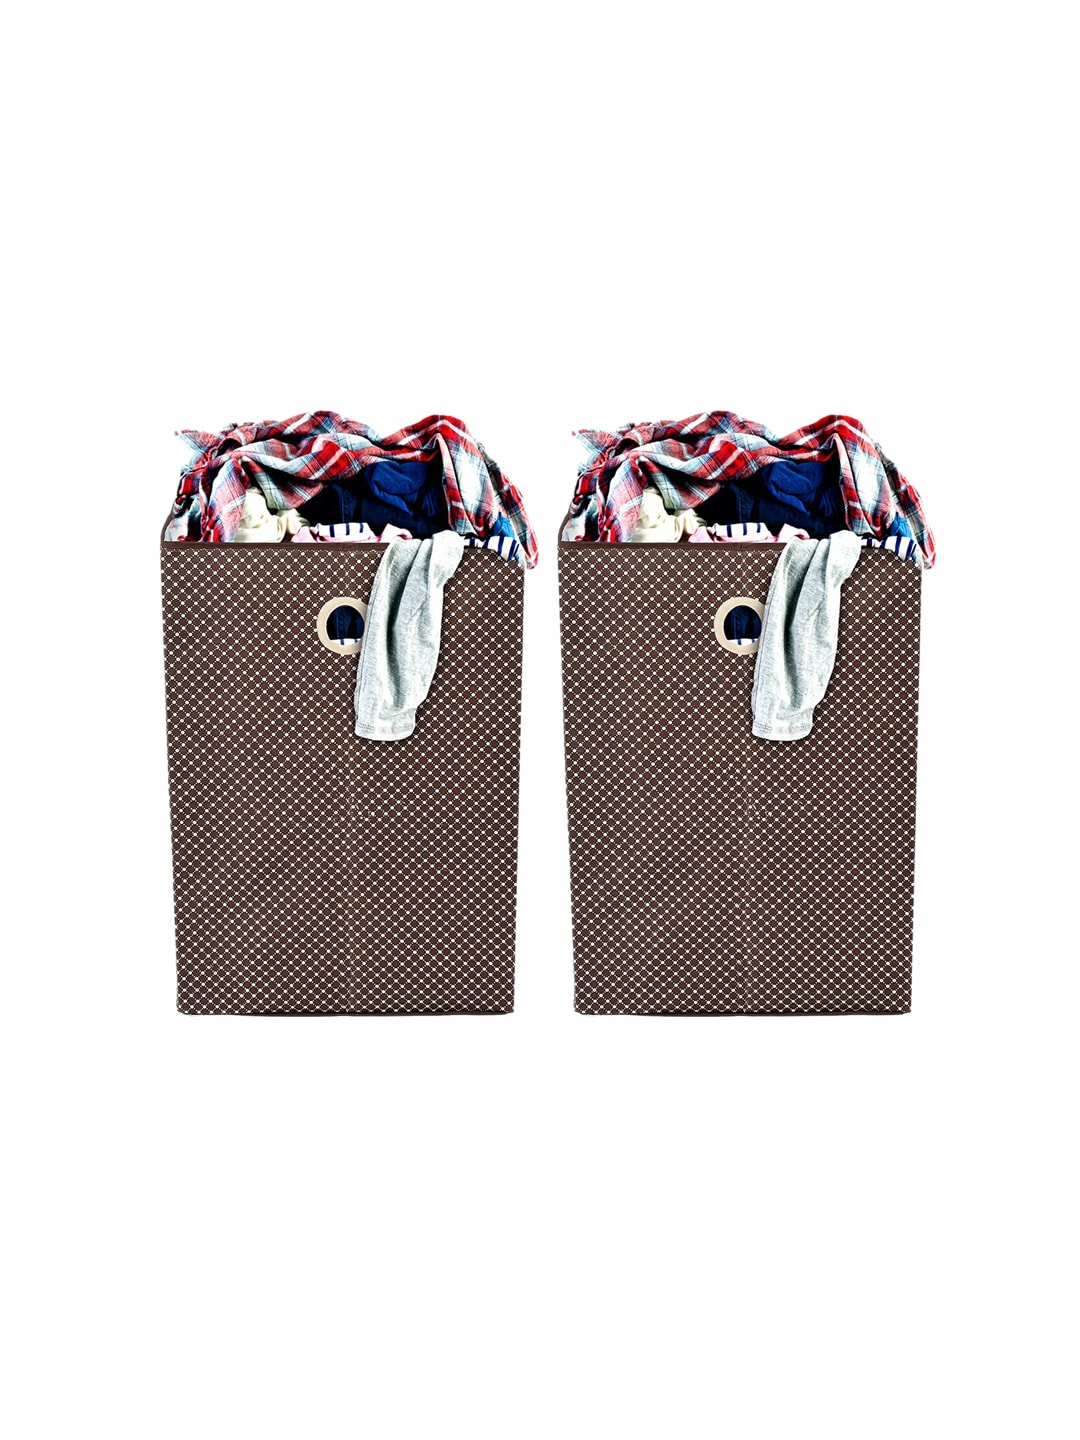 Kuber Industries Set Of 2 Foldable Large Laundry basket With Handles Price in India